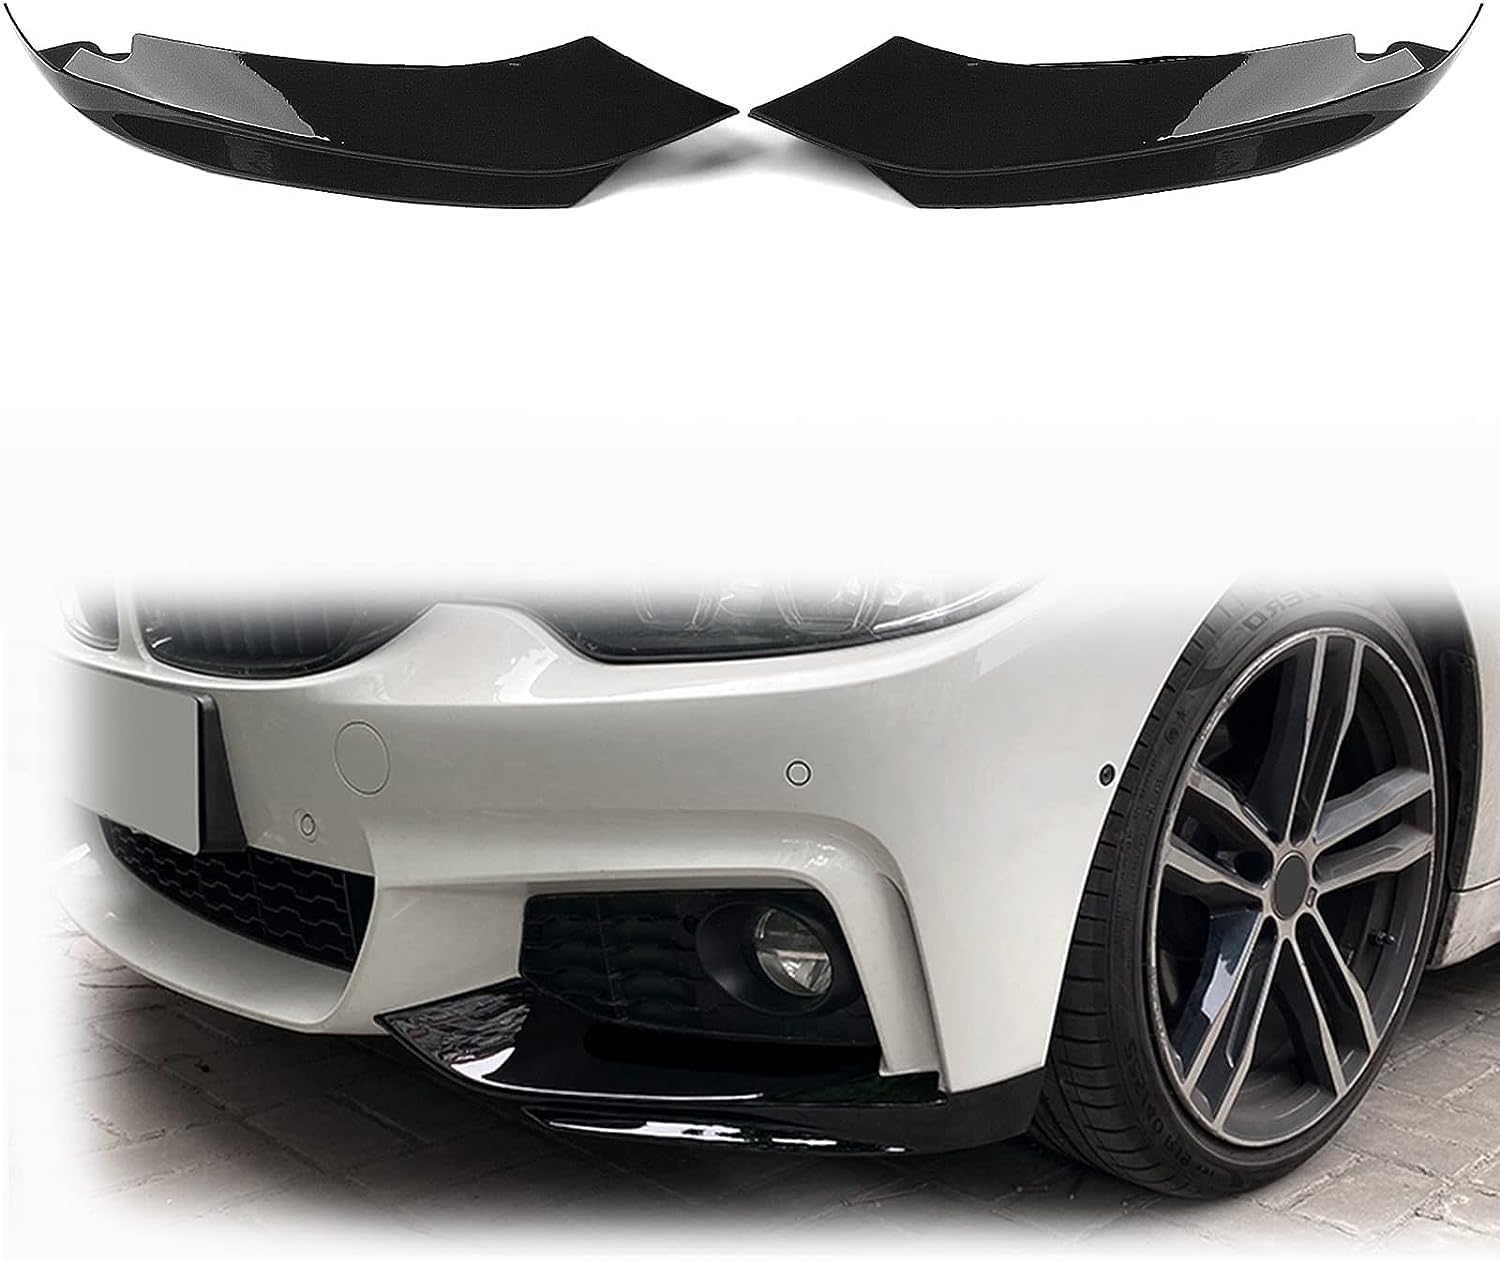 Auto Frontlippe Frontspoiler für BMW Série 4 F32 F33 F36 M-Tech 430i 435i,Frontlippe Spoiler Protector Car Styling Karosserie-Anbauteile von AMAIR